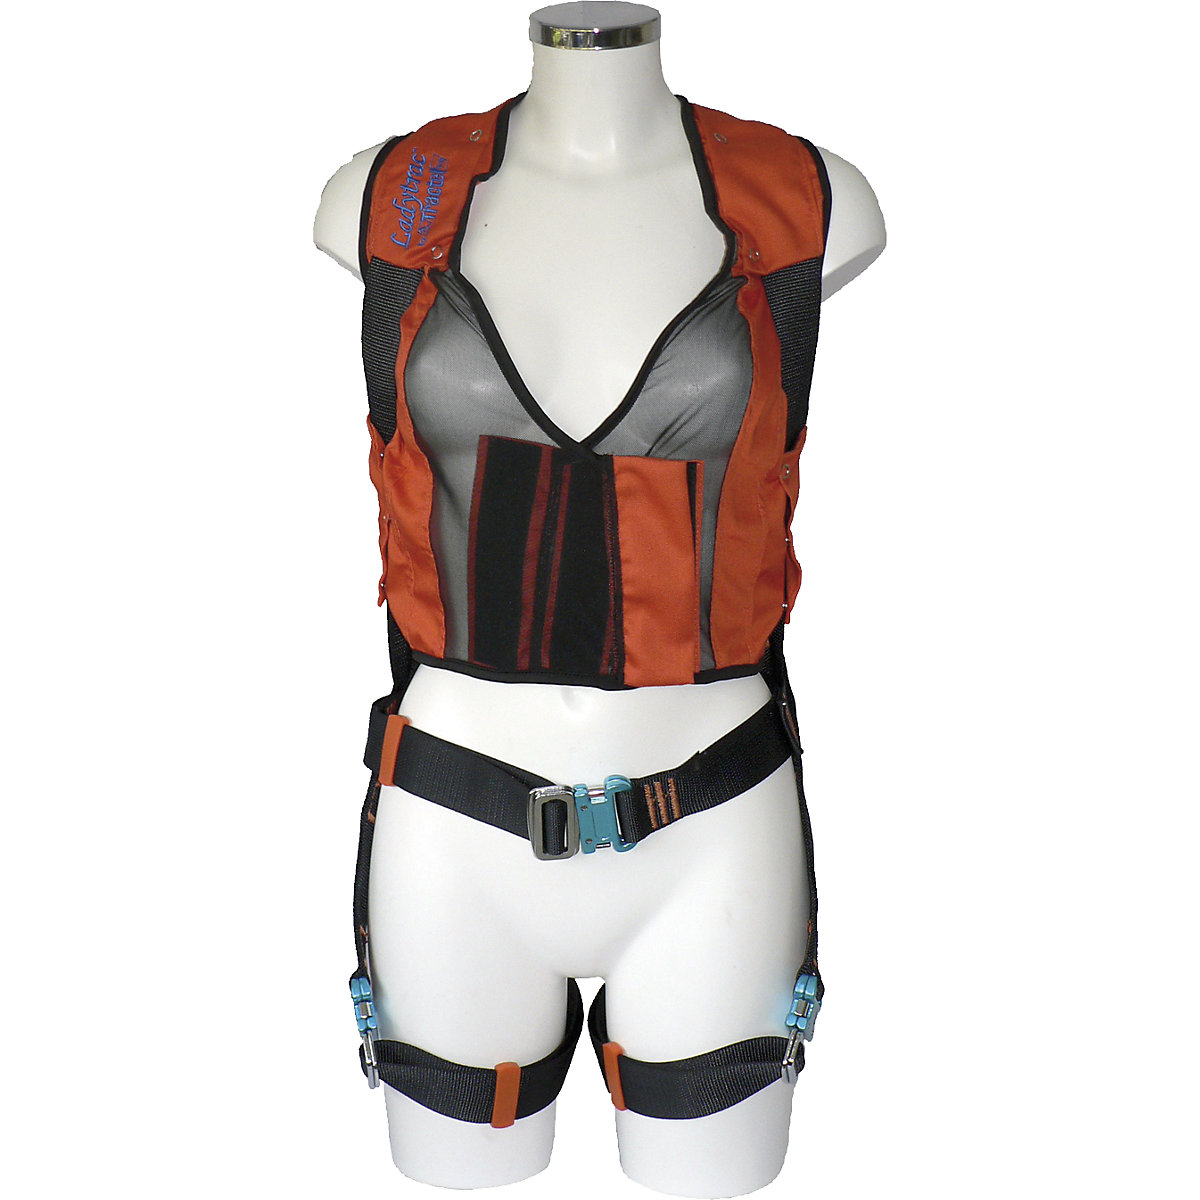 LADYTRAC safety harness